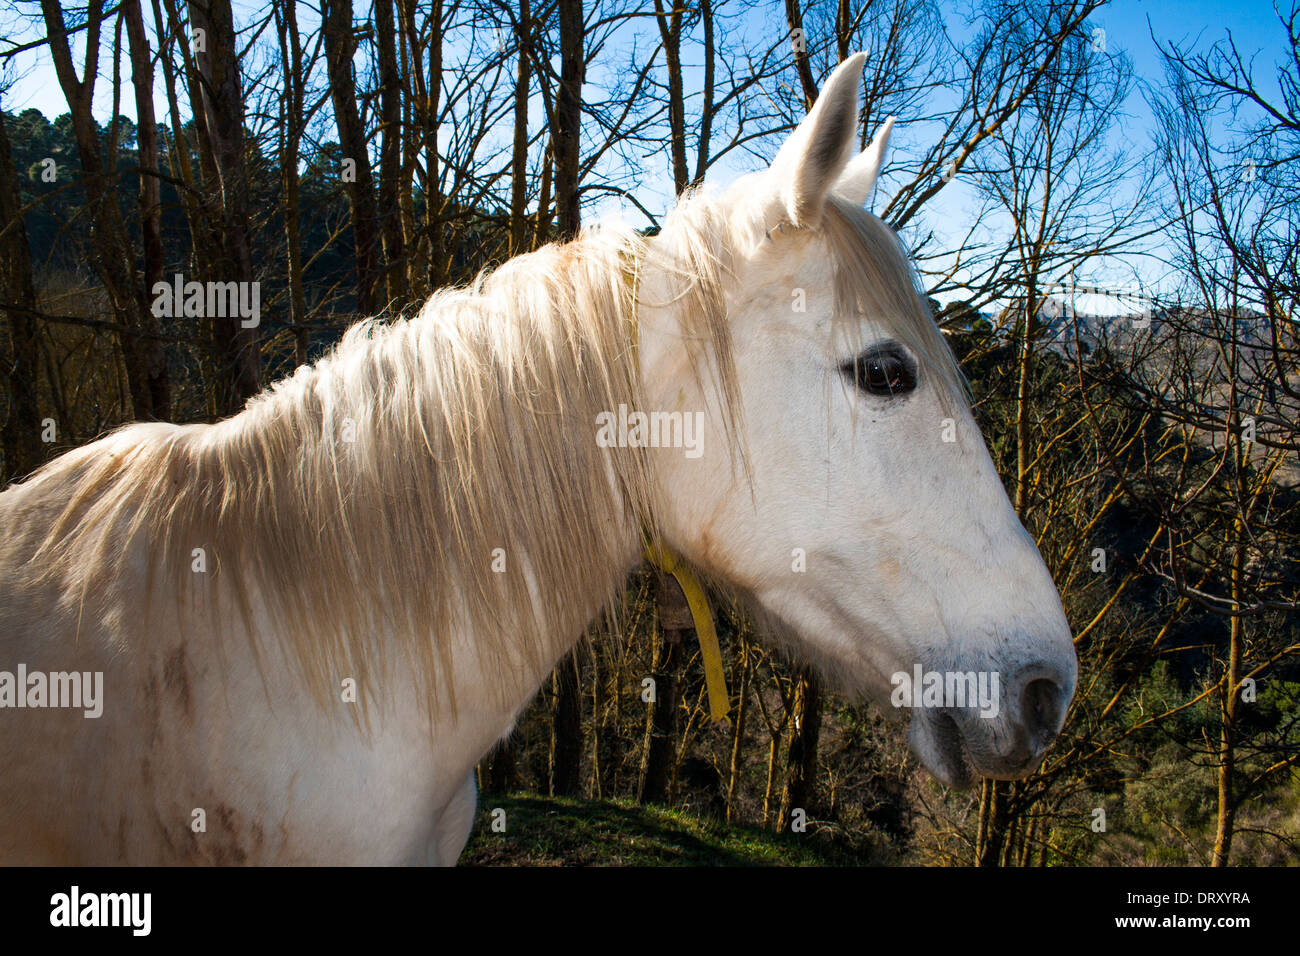 White horse in the field Stock Photo